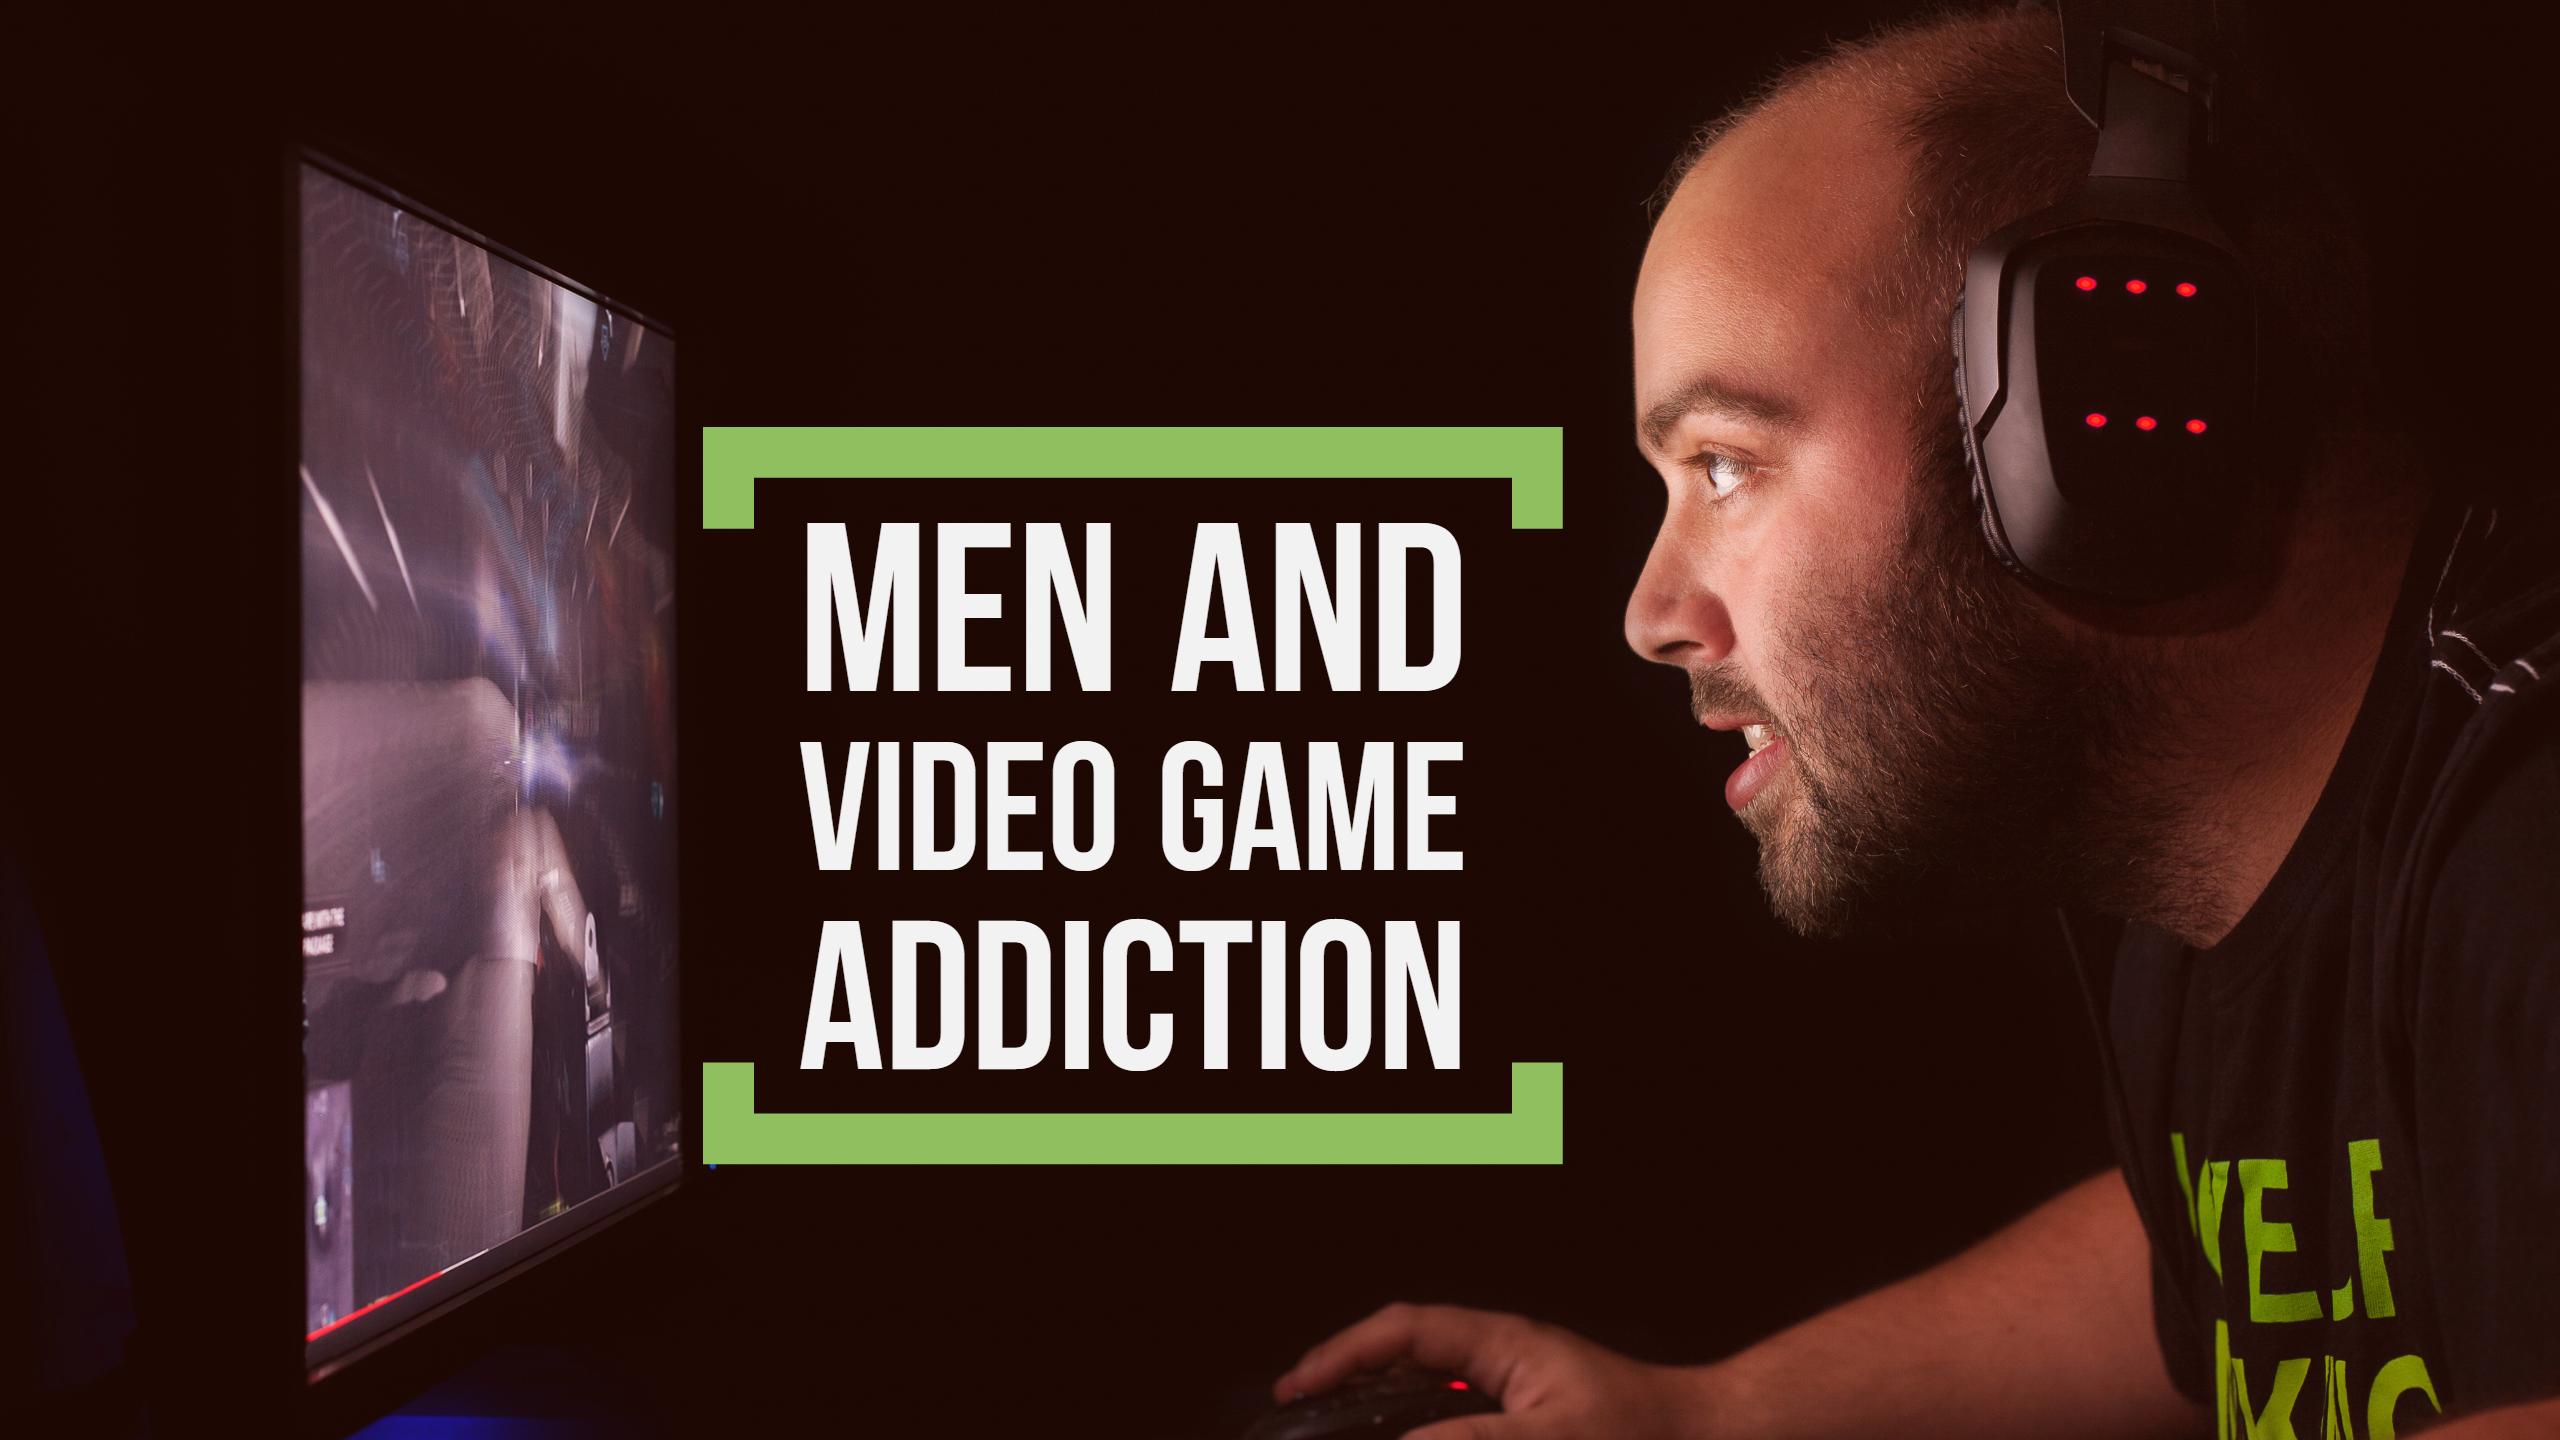 Video Game Addiction: Signs, Effects and Treatment